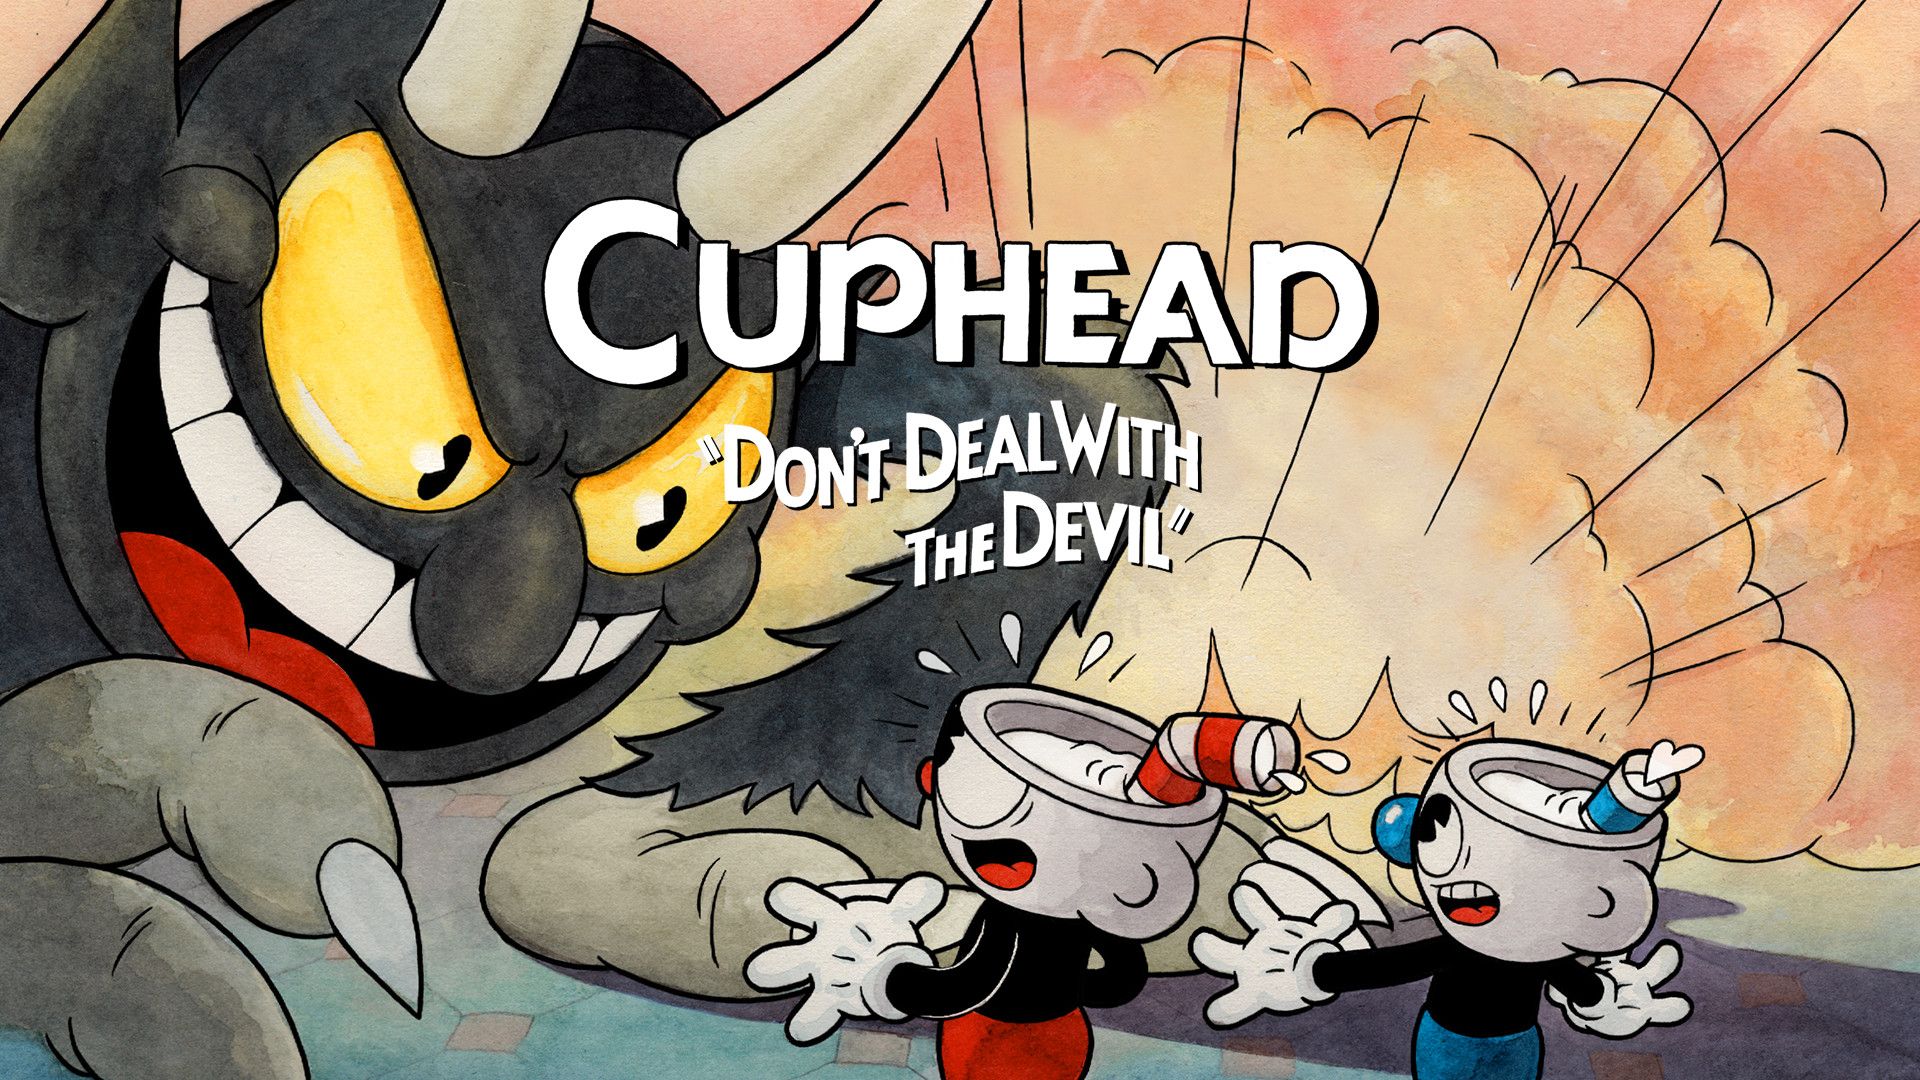 Possible Or Not This Cuphead X Touhou Crossover Makes A